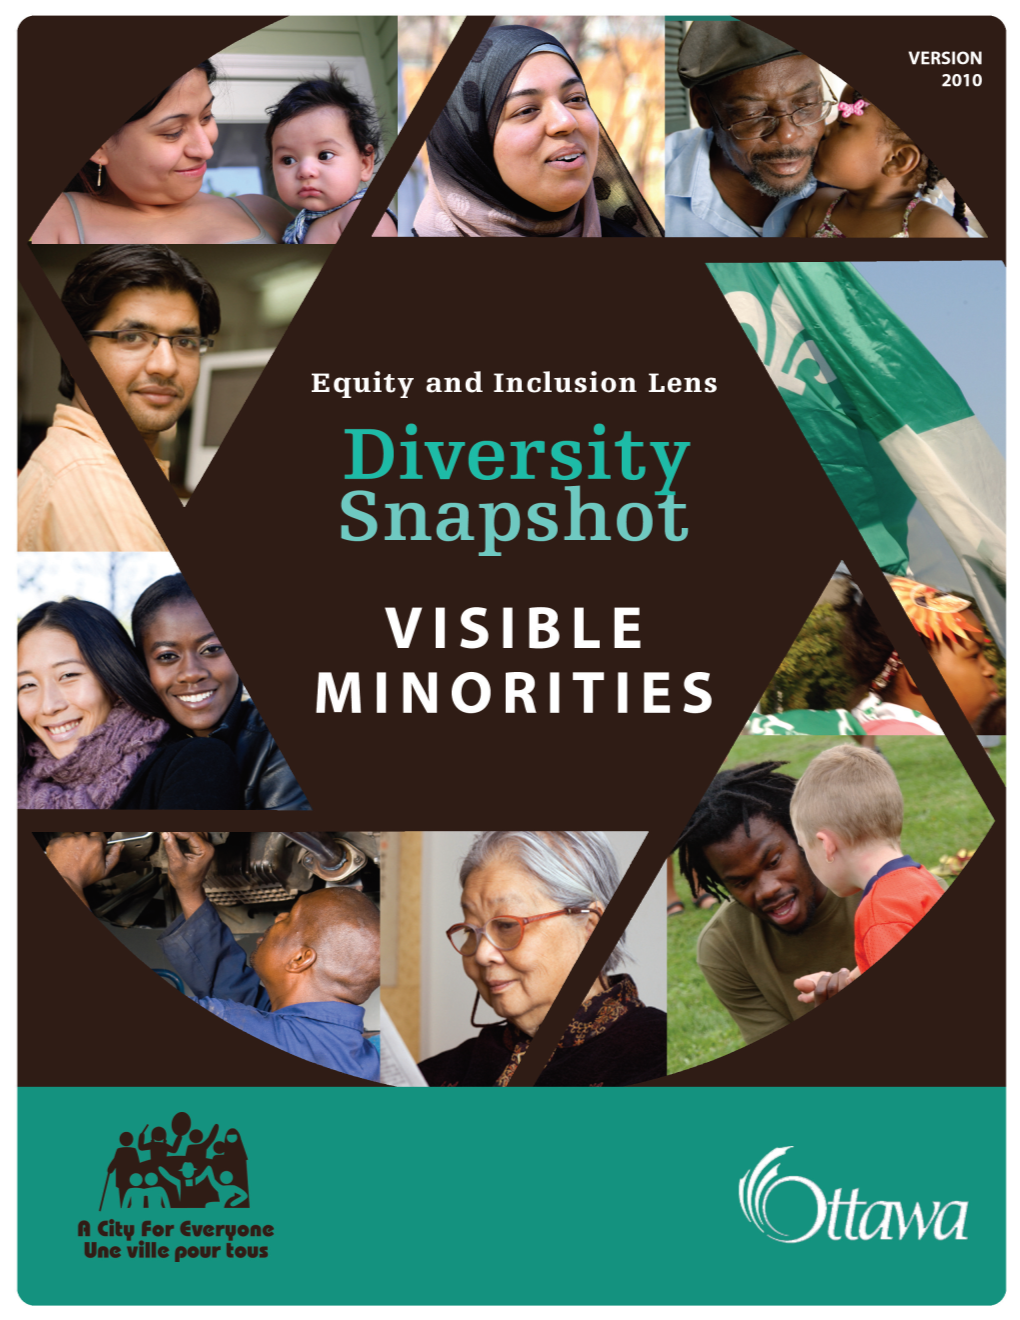 VISIBLE MINORITIES — Equity and Inclusion Lens